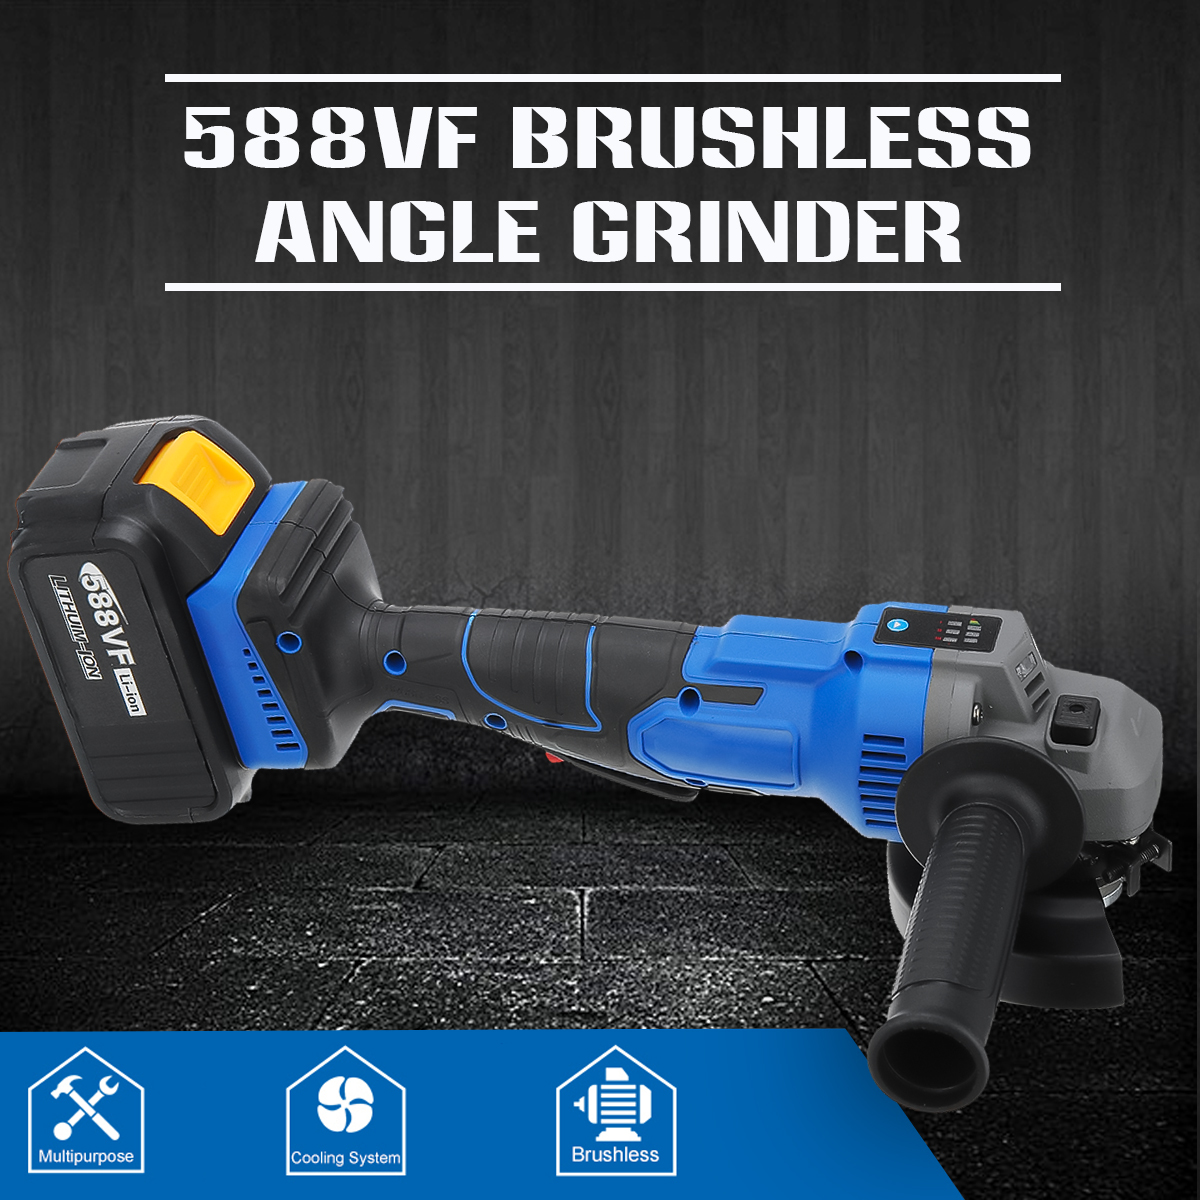 588VF-Cordless-Brushless-100mm-1580W-Electric-Angle-Grinder-3-Gears-Adjustable-Grinding-Machine-Poli-1941456-4